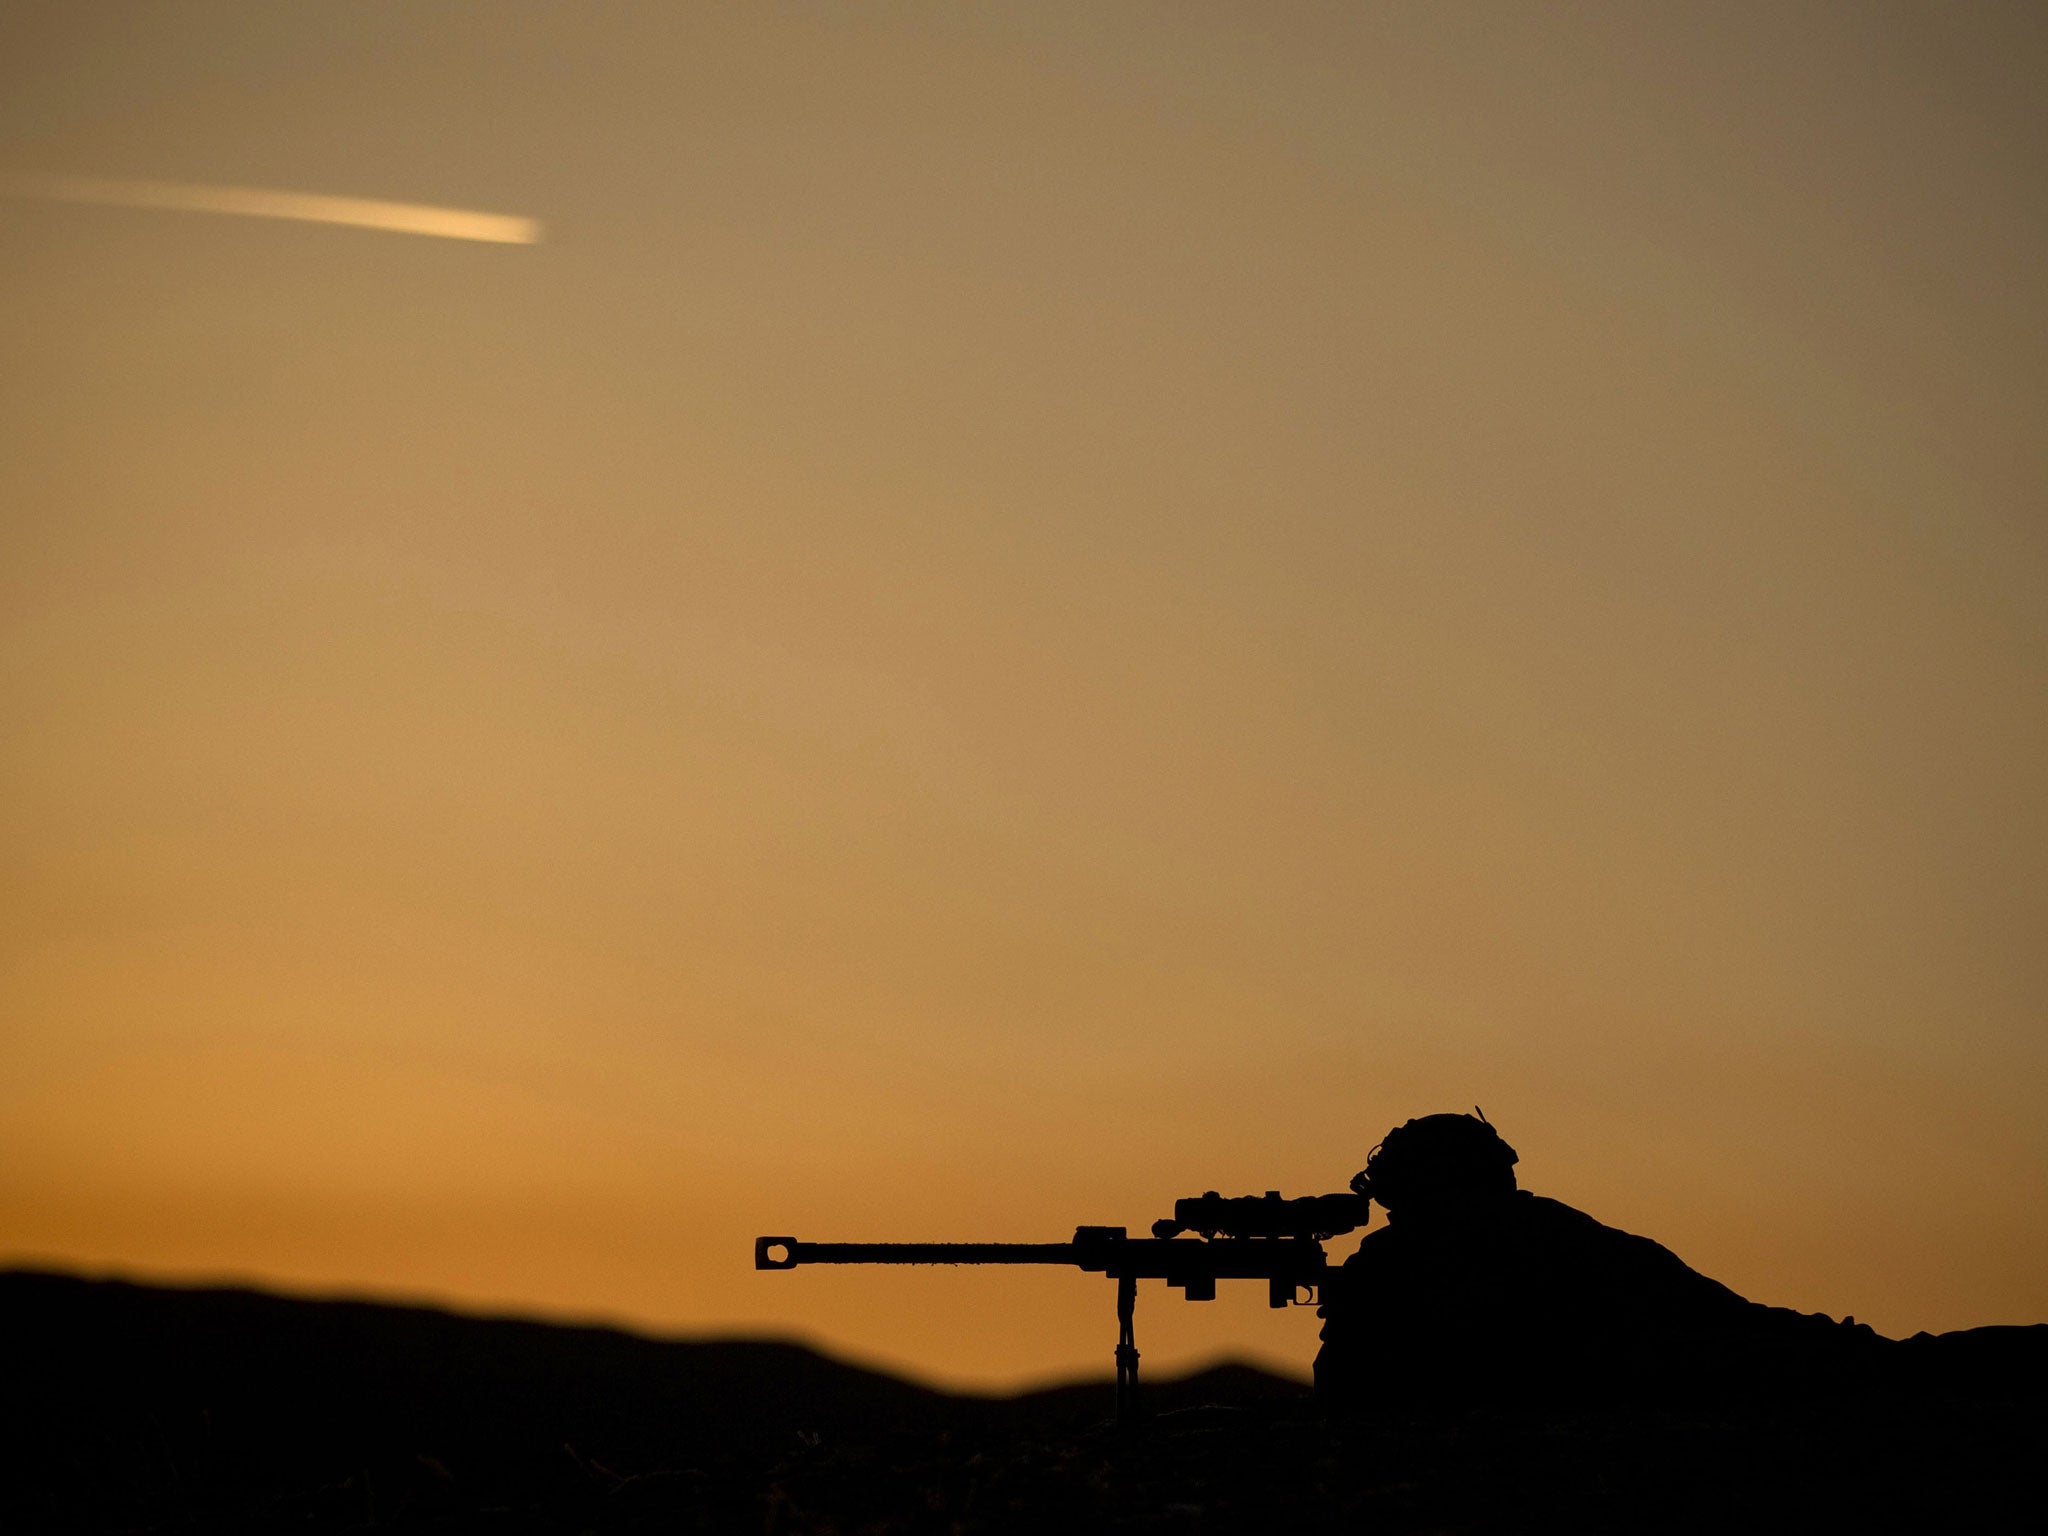 The shot was fired at a range of 850 metres by a lance corporal in the Coldstream Guards